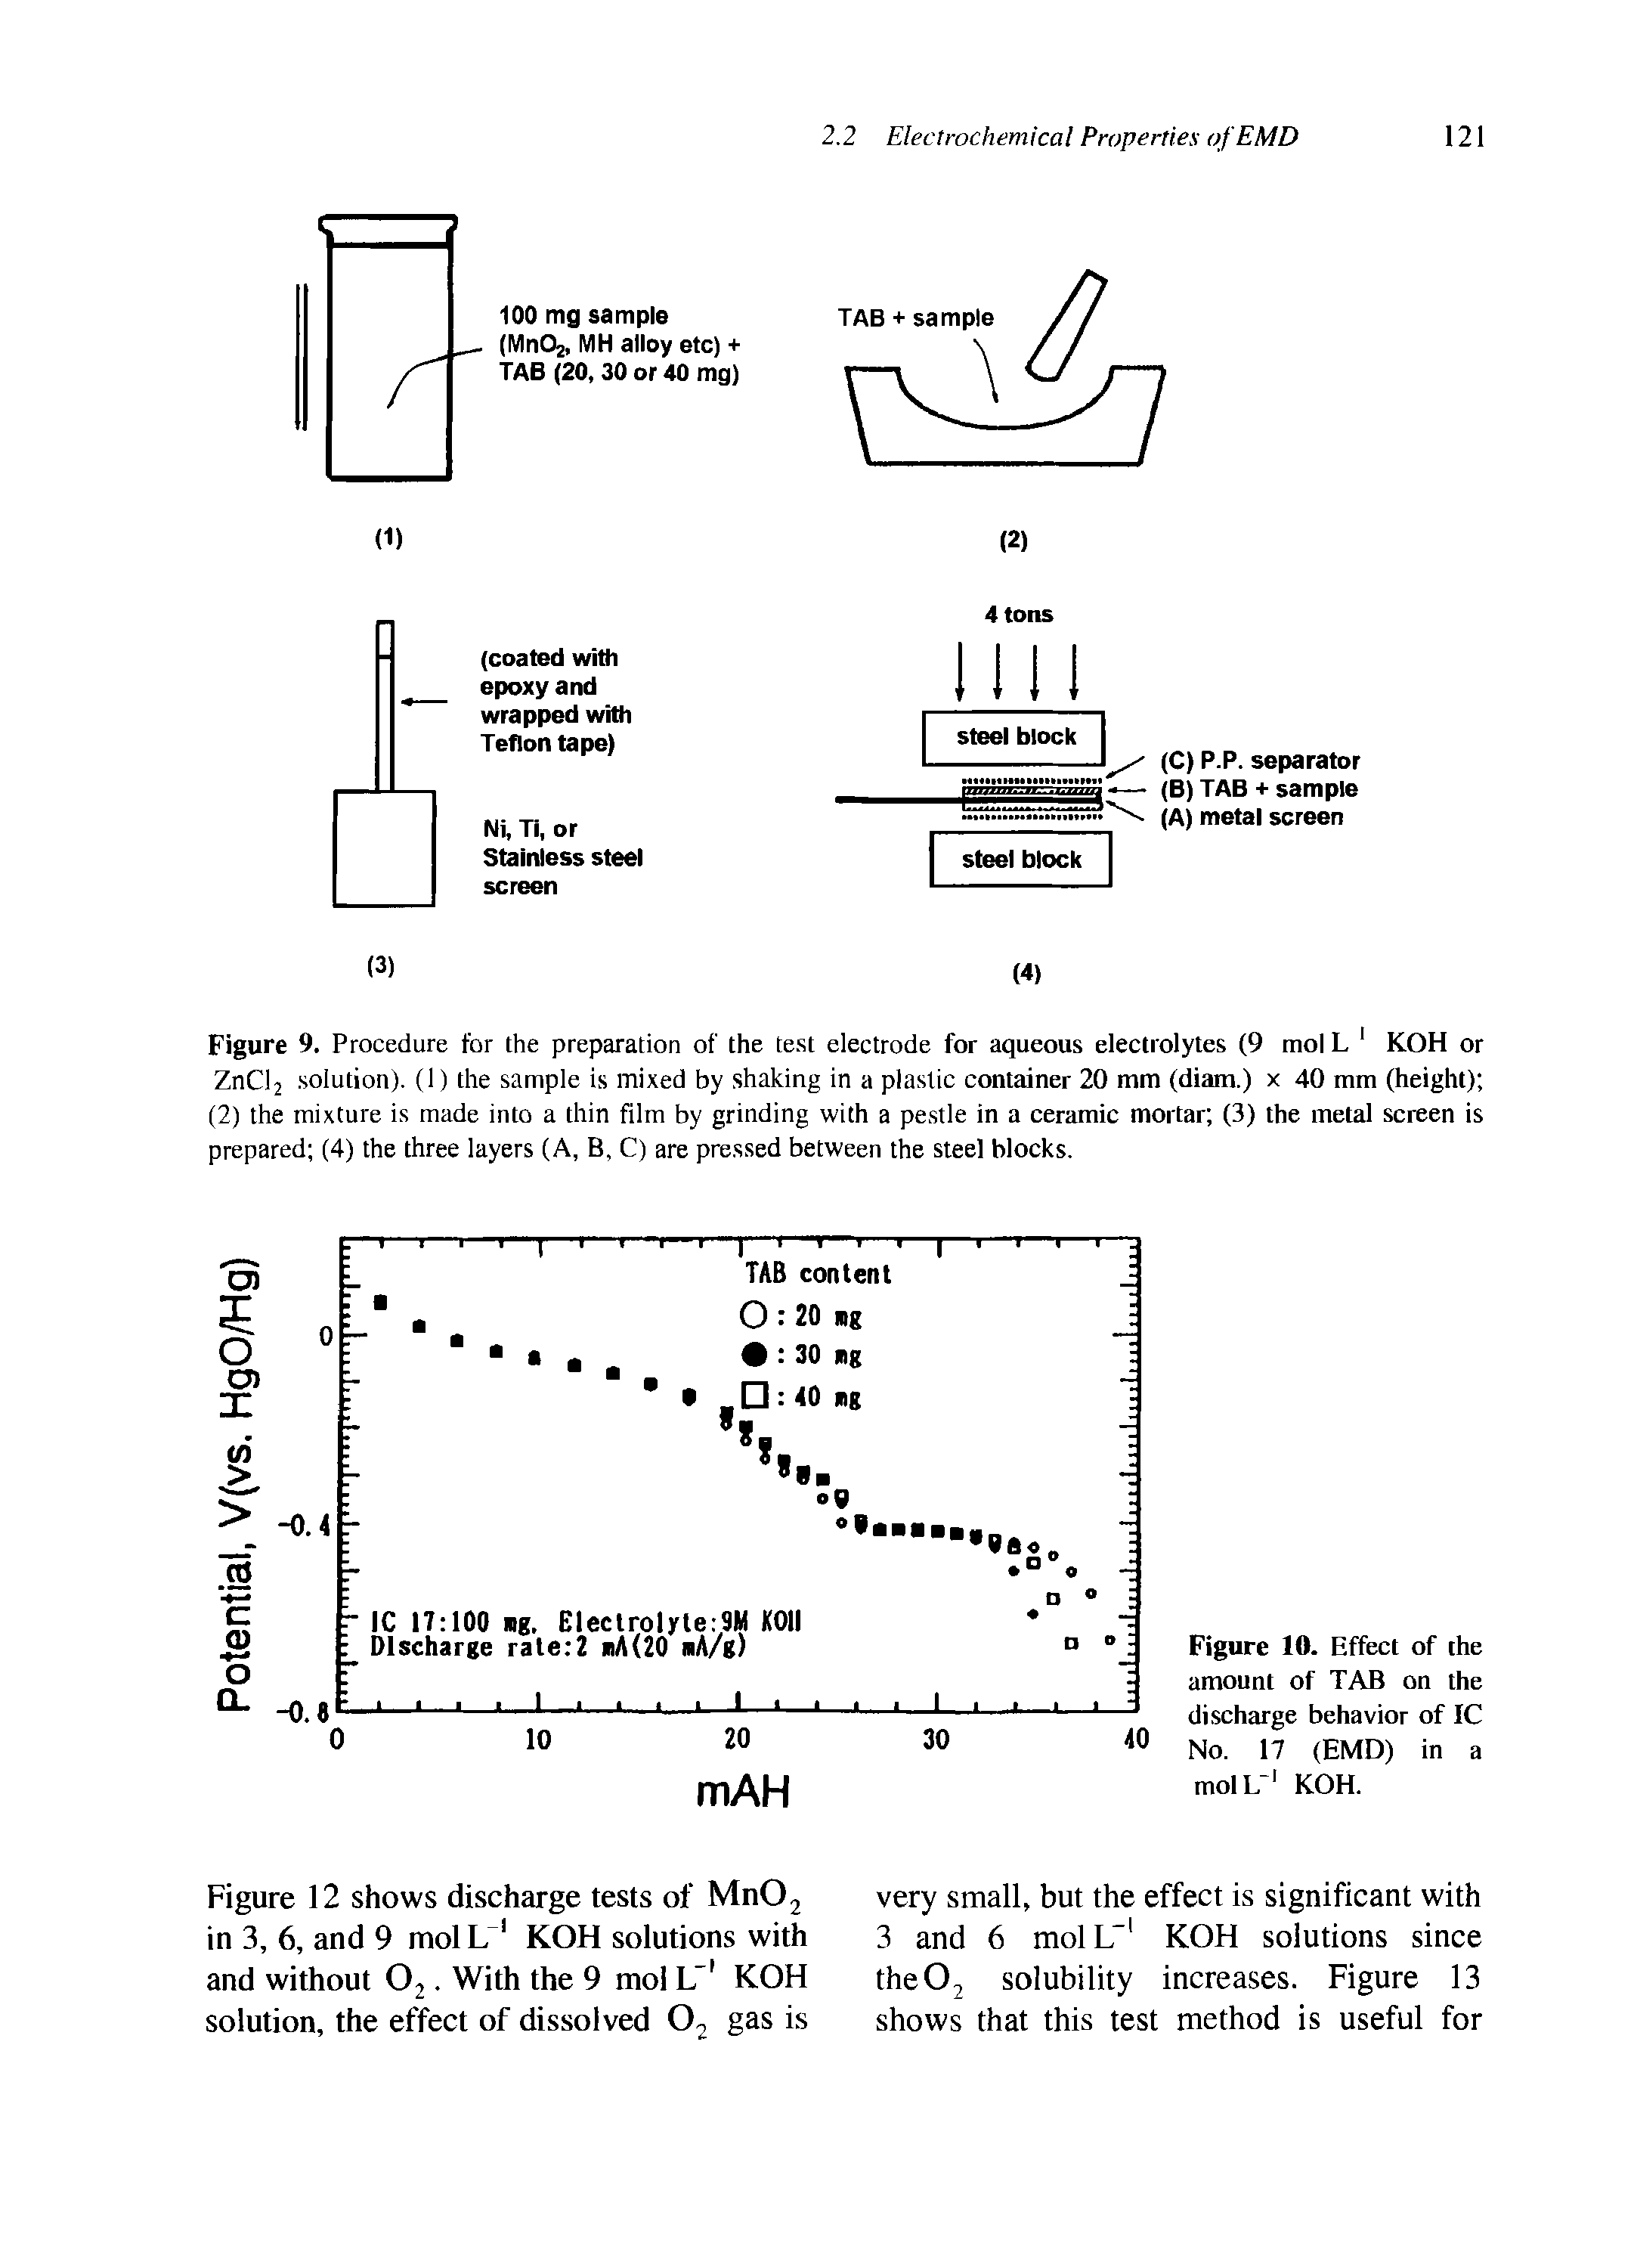 Figure 9. Procedure for the preparation of the test electrode for aqueous electrolytes (9 mol L 1 KOH or ZnCl2 solution). (1) the sample is mixed by shaking in a plastic container 20 mm (diam.) x 40 mm (height) (2) the mixture is made into a thin film by grinding with a pestle in a ceramic mortar (3) the metal screen is prepared (4) the three layers (A, B, C) are pressed between the steel blocks.